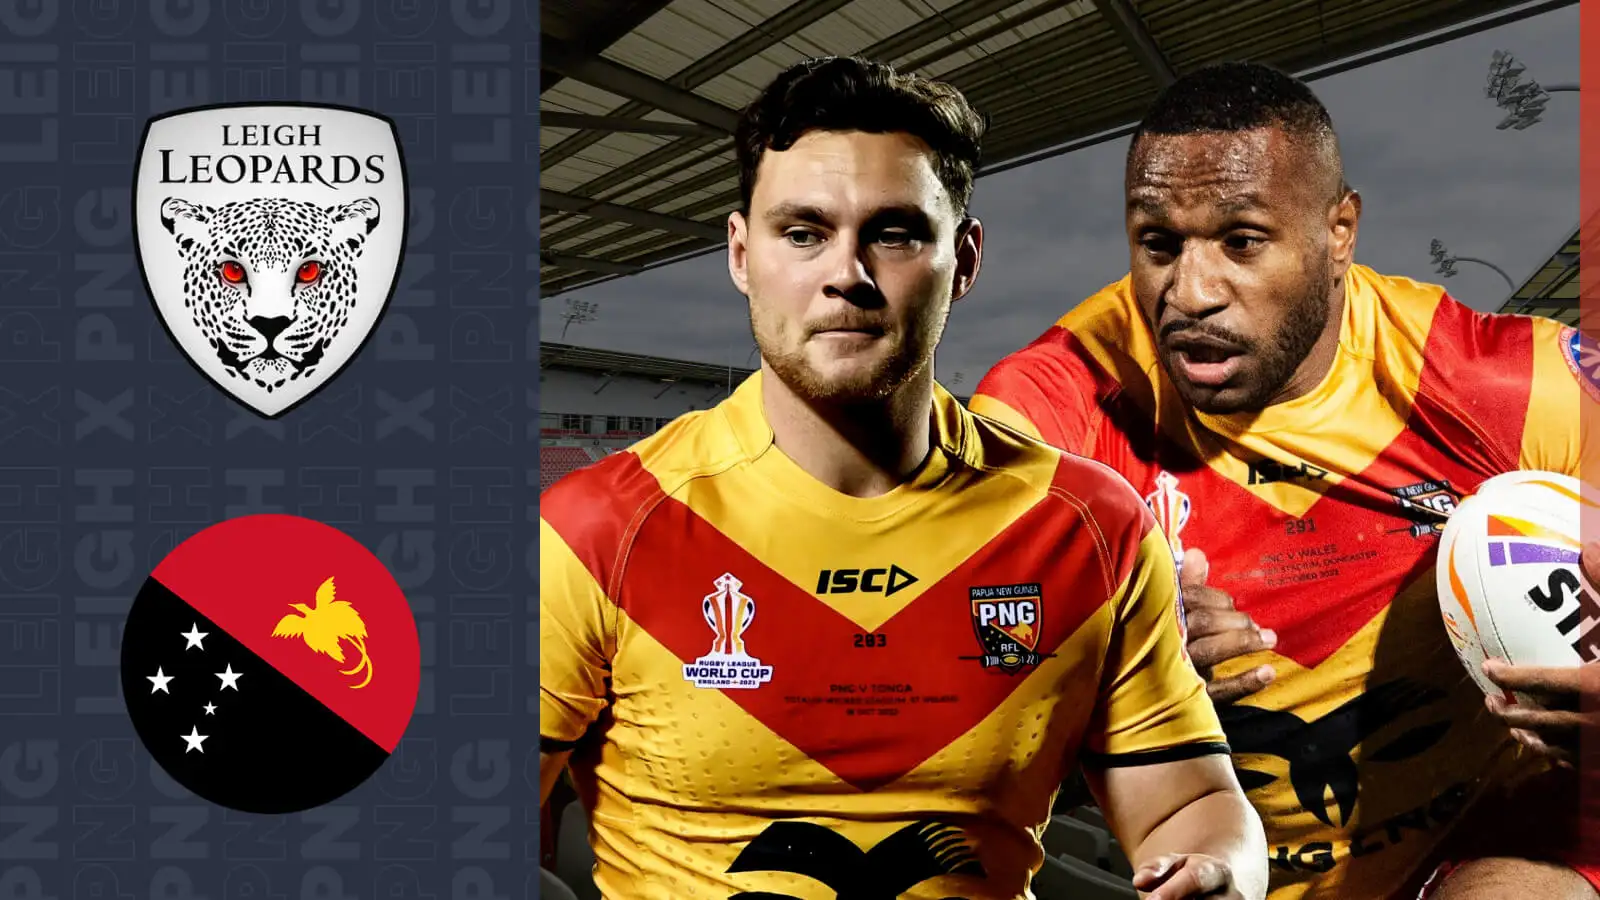 Leigh Leopards stars Lachlan Lam & Edwin Ipape ‘humbled’ by Papua New Guinea support as hooker takes a trip down memory lane